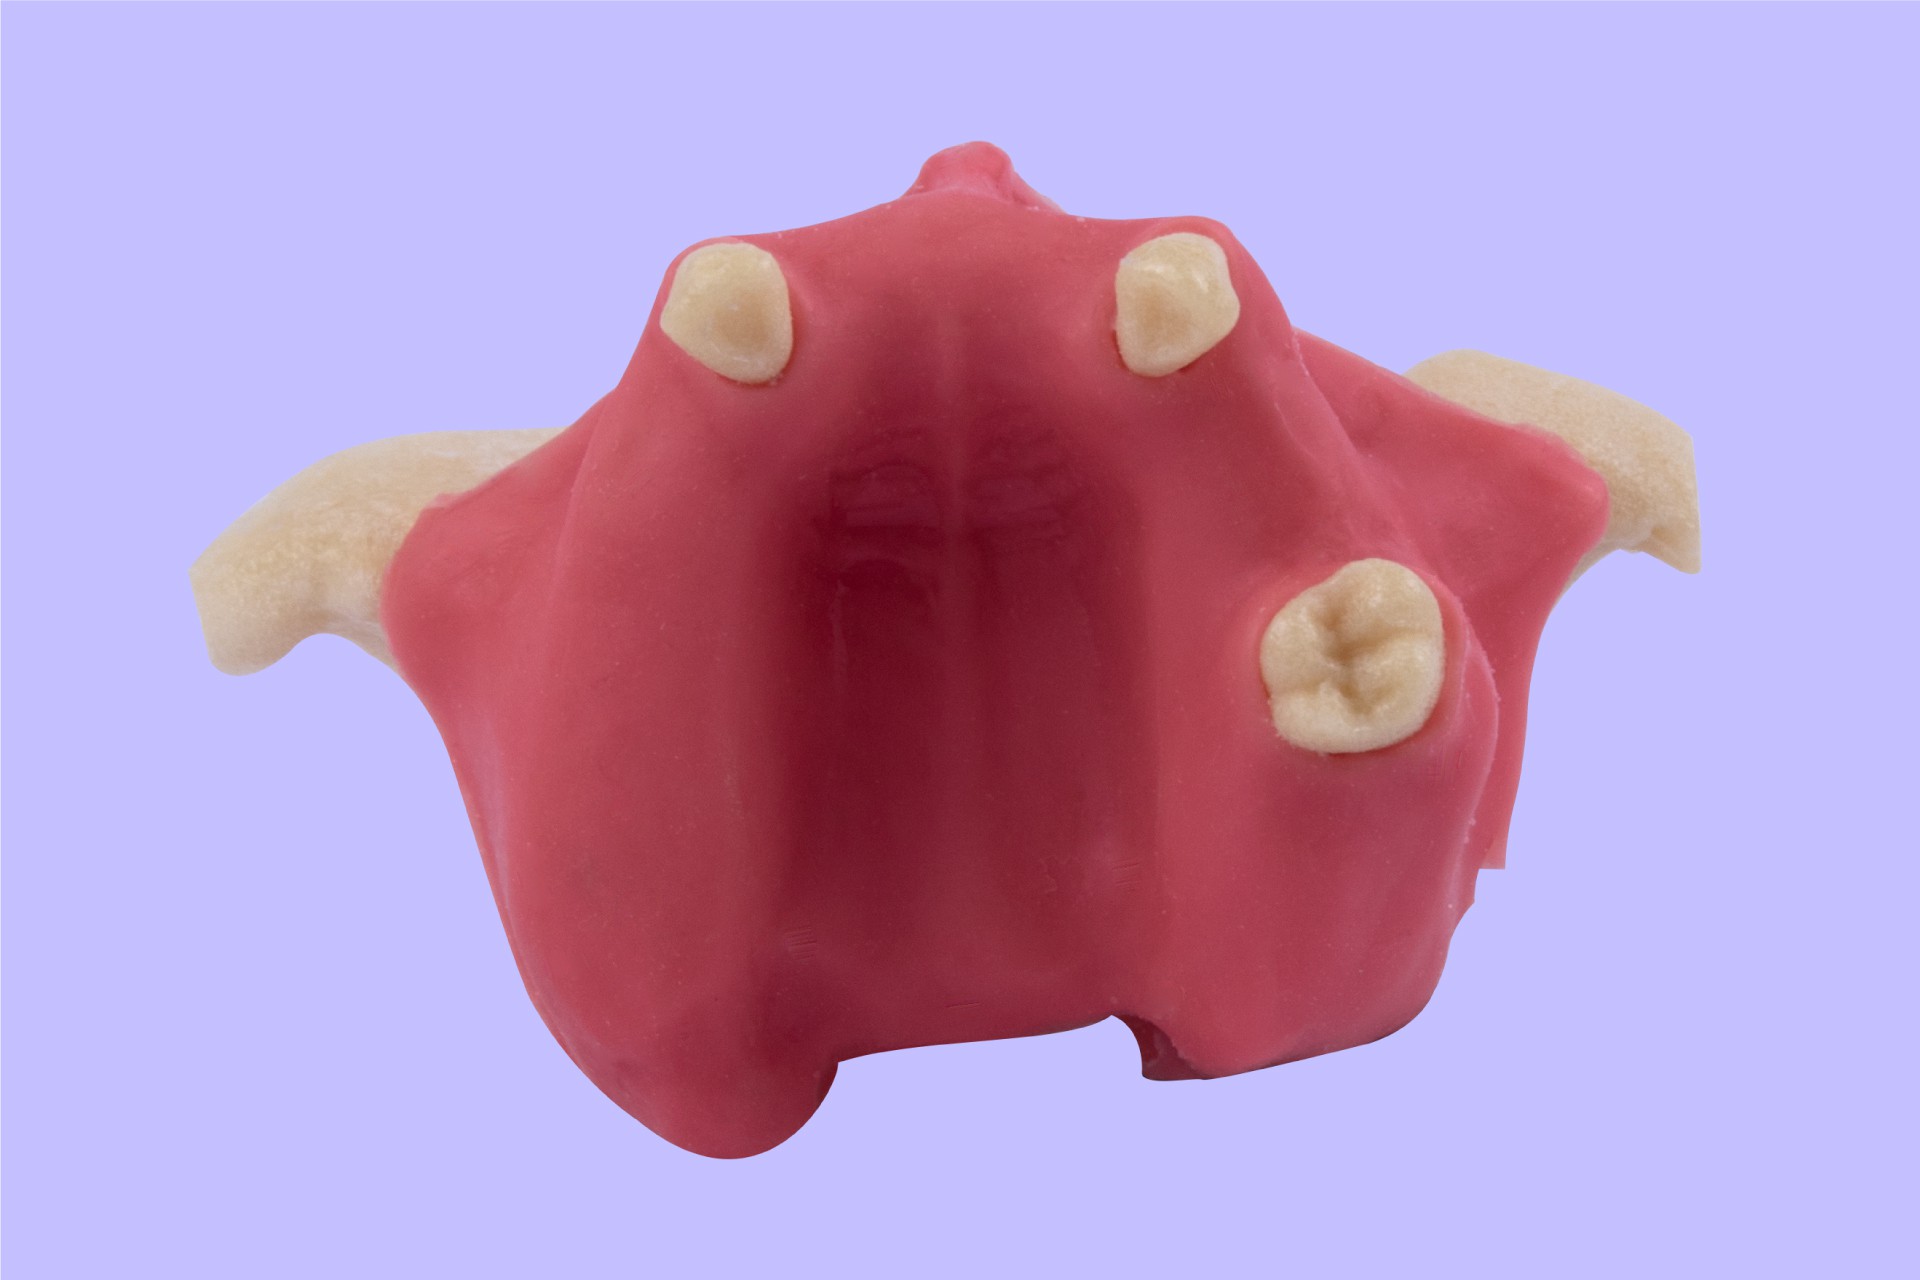 Anatomical Maxillary Atrophy with Soft Gum